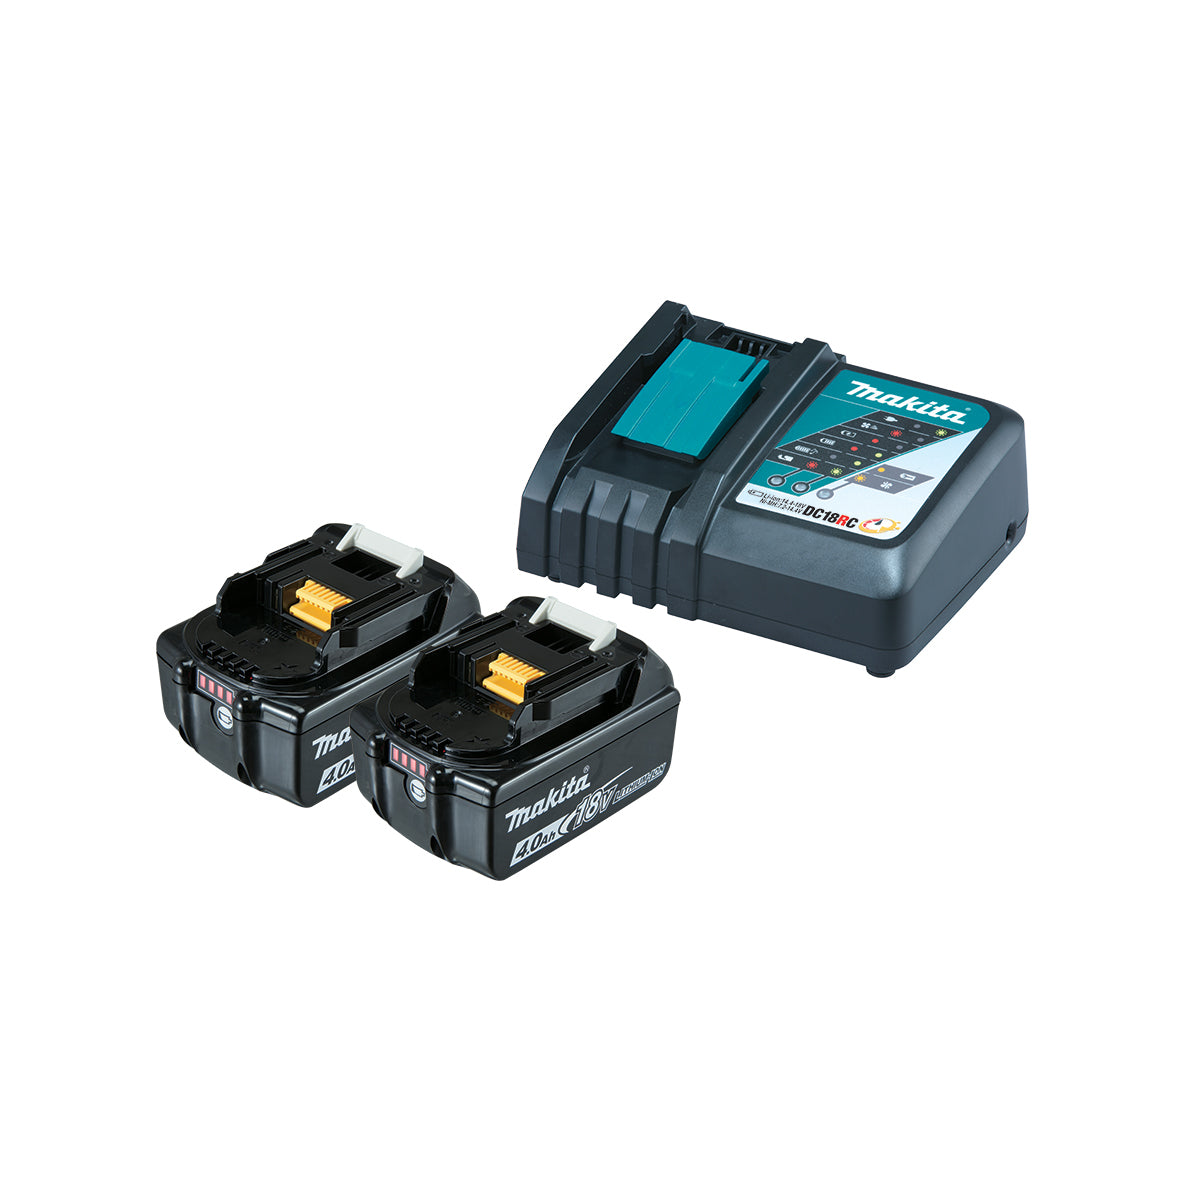 18V Single Port Rapid Battery Charger with Two 4.0Ah Fuel Gauge Batteries Kit 198497-6 by Makita